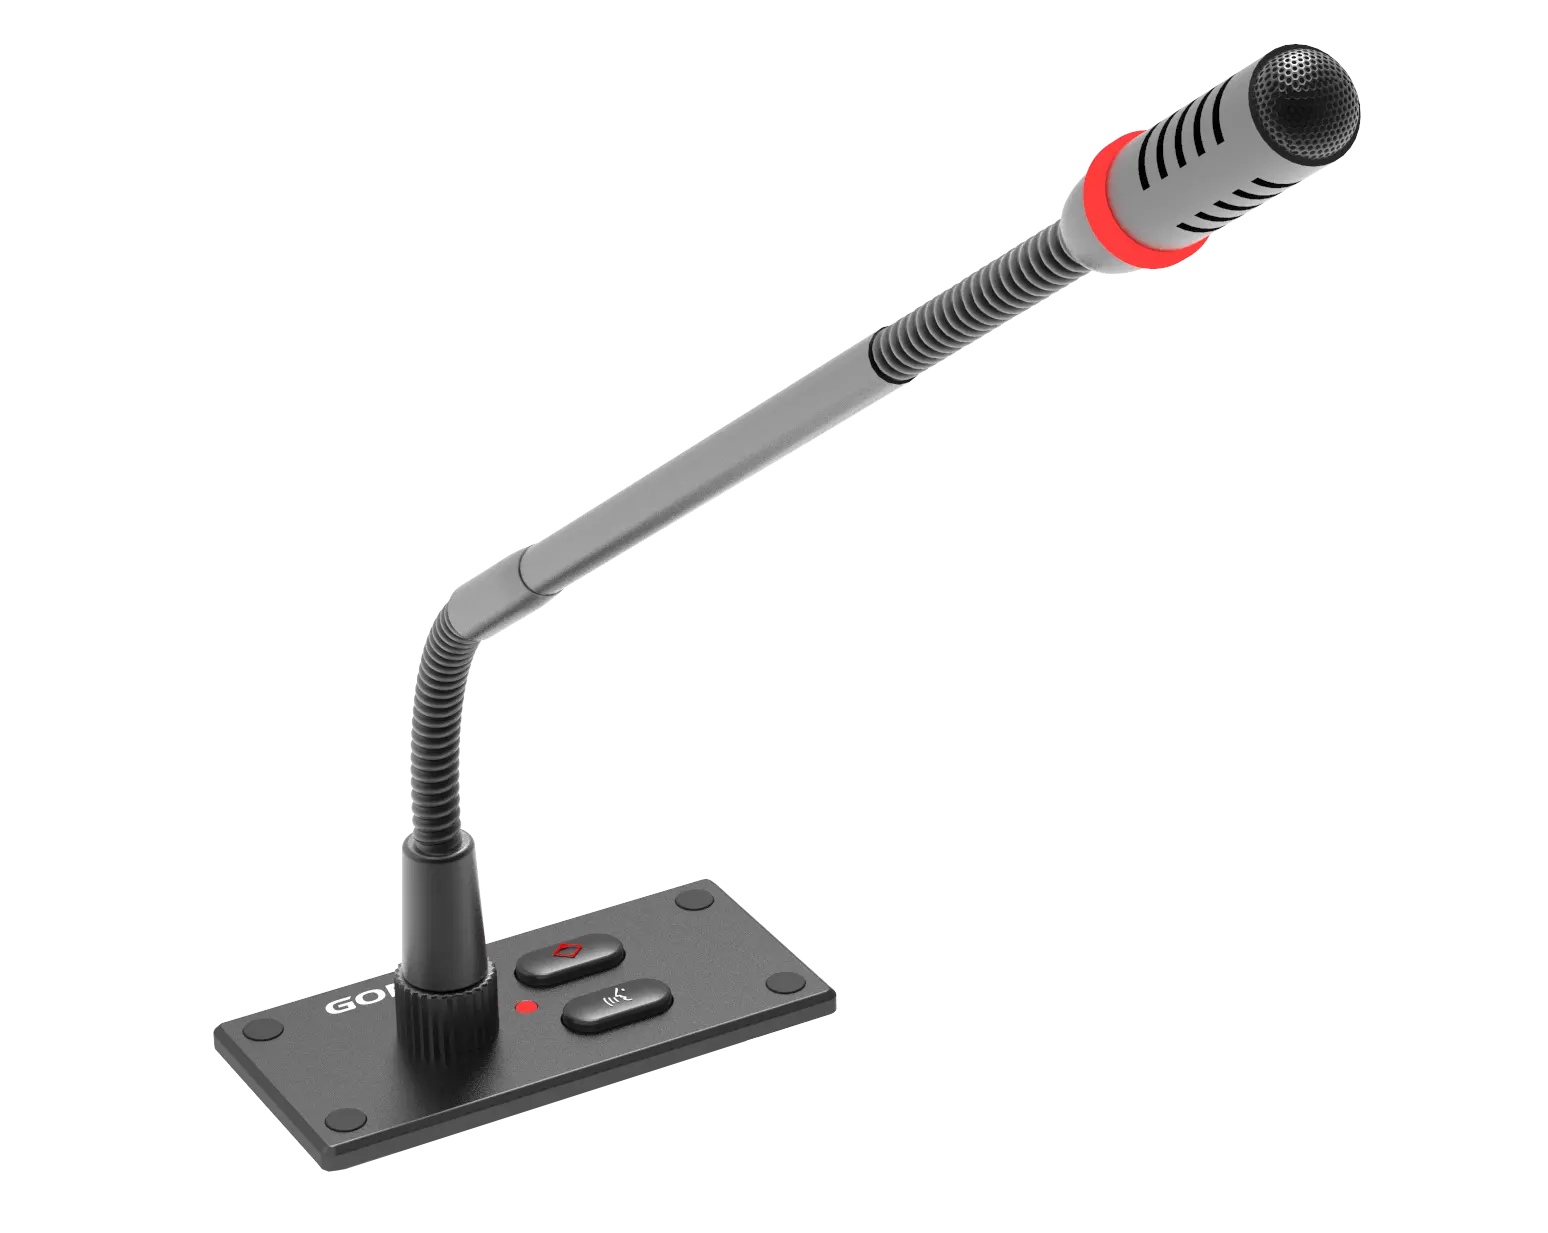 New Design Confer Audio Meeting Systems For Conference Room Discussion System With Flush Mount Full Digital Embedded Microphone